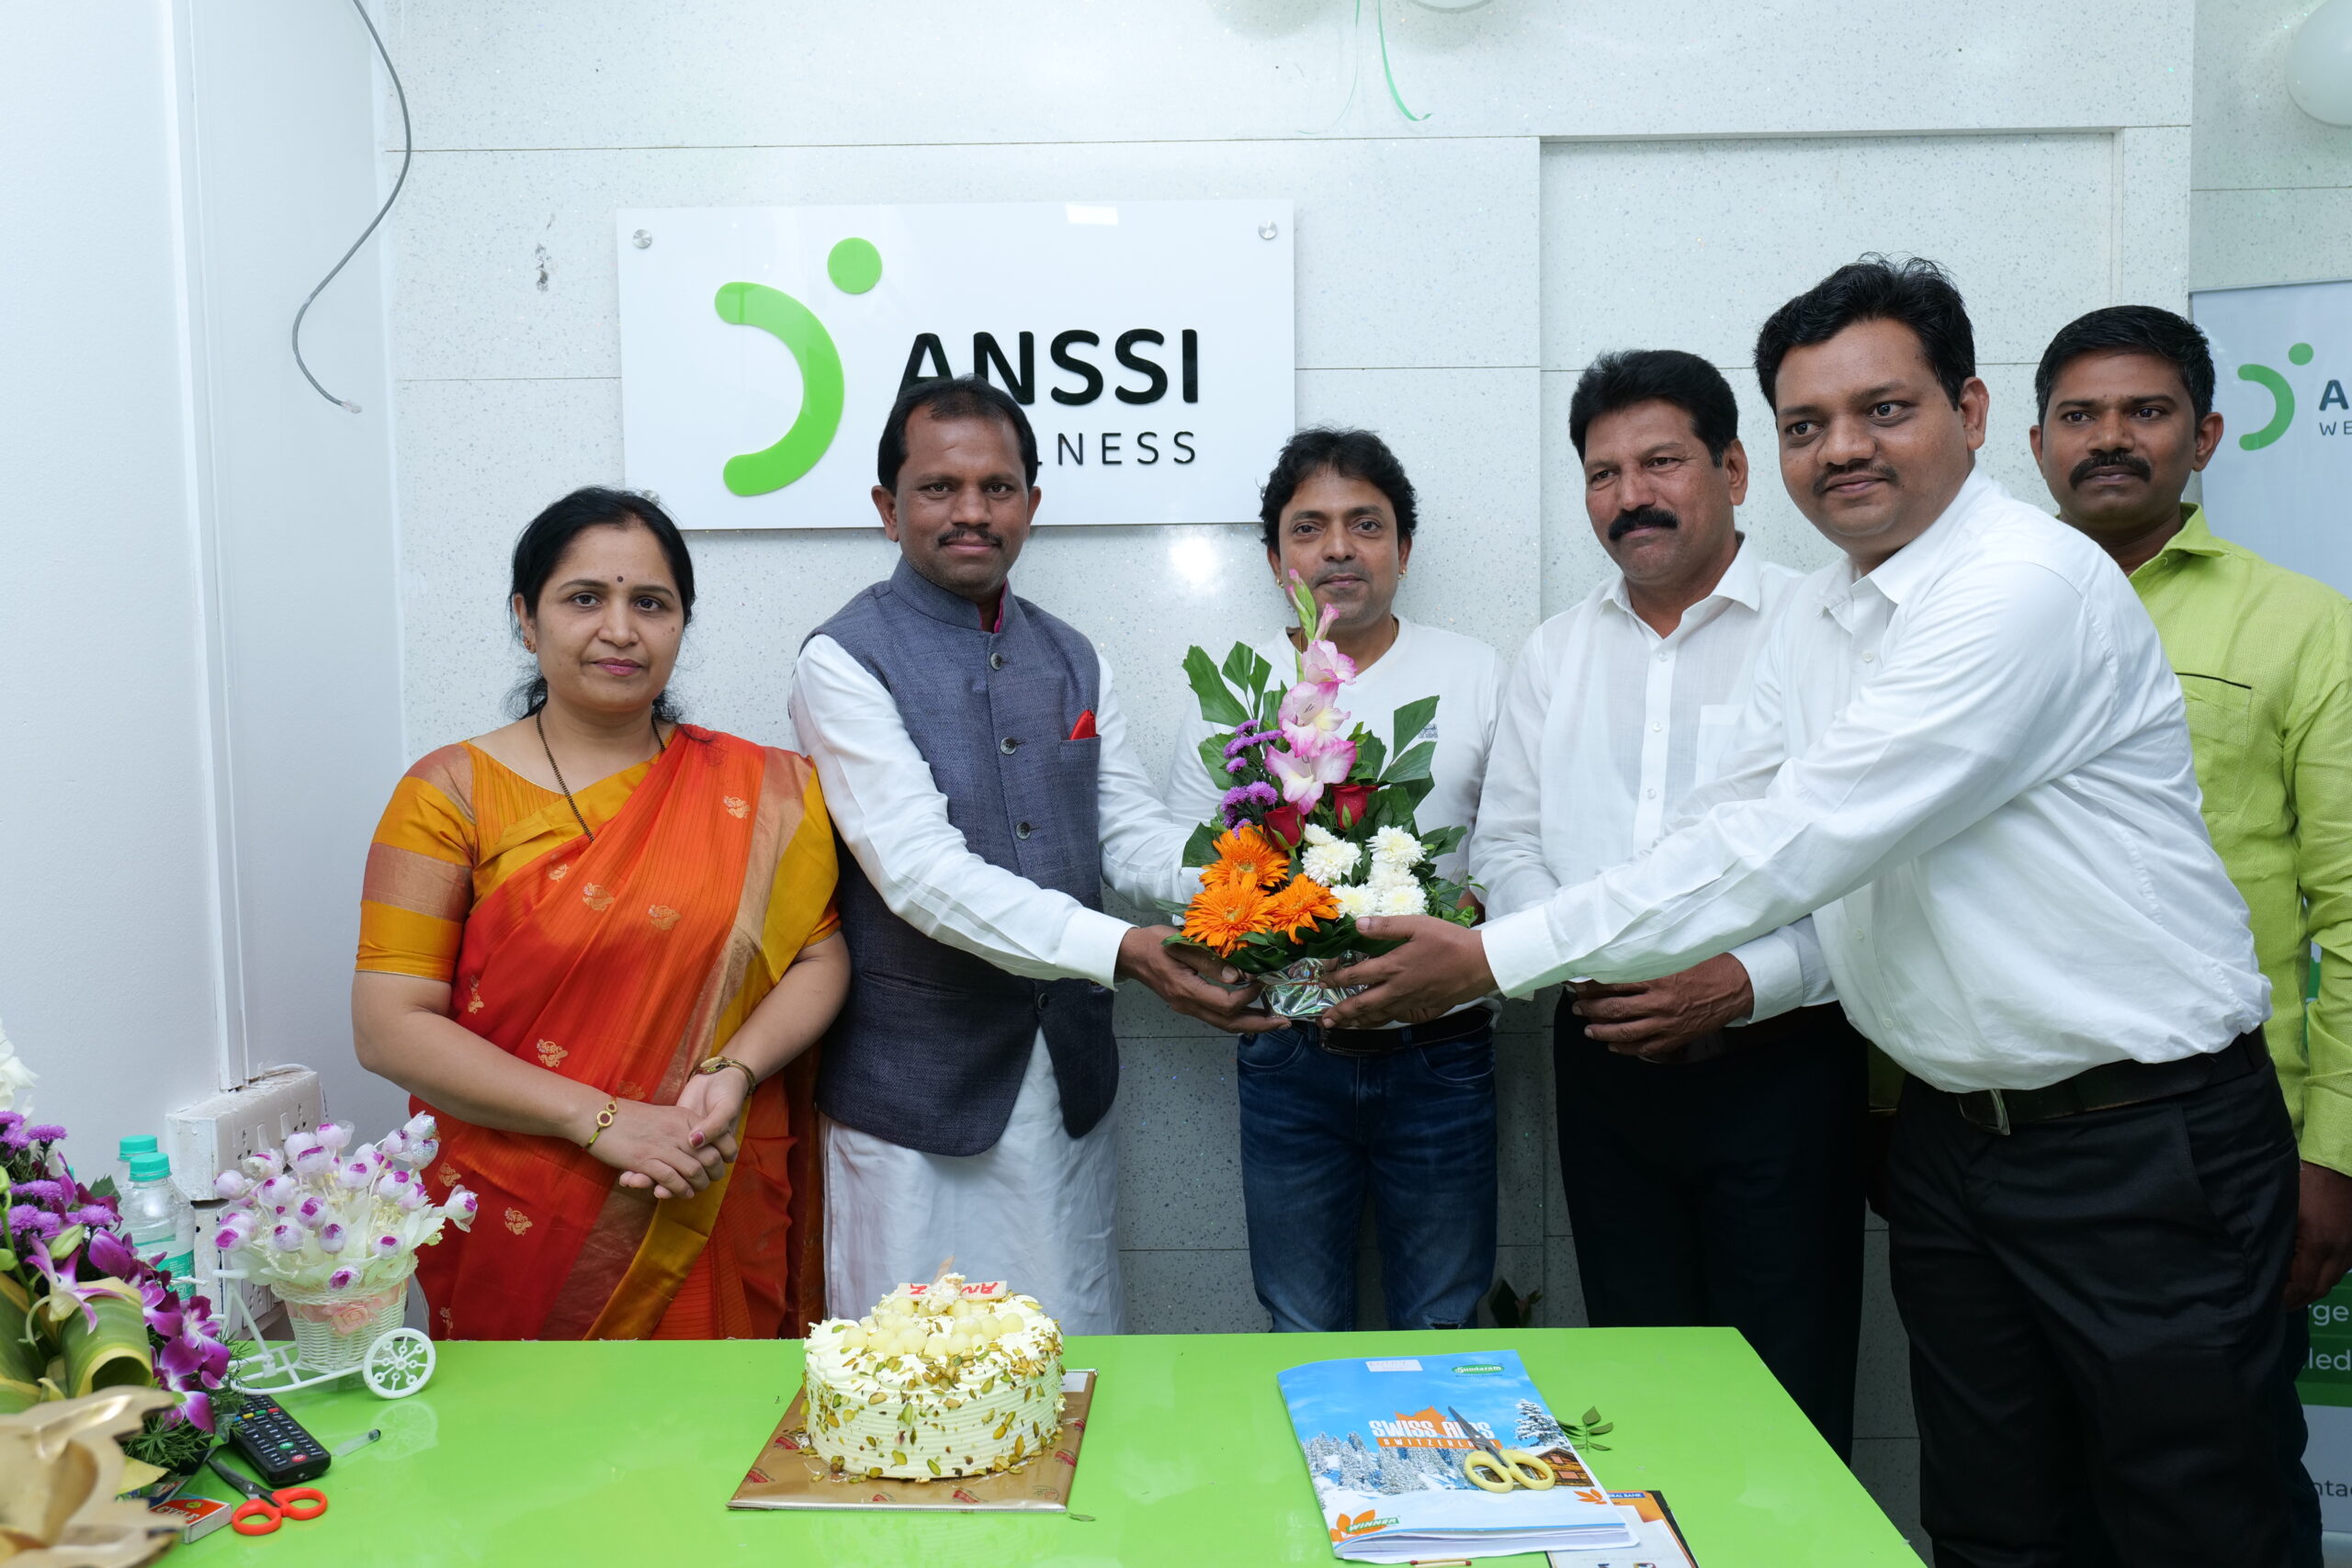 ANSSI Wellness inaugurates its new Spine Clinic in Aundh (Pune)